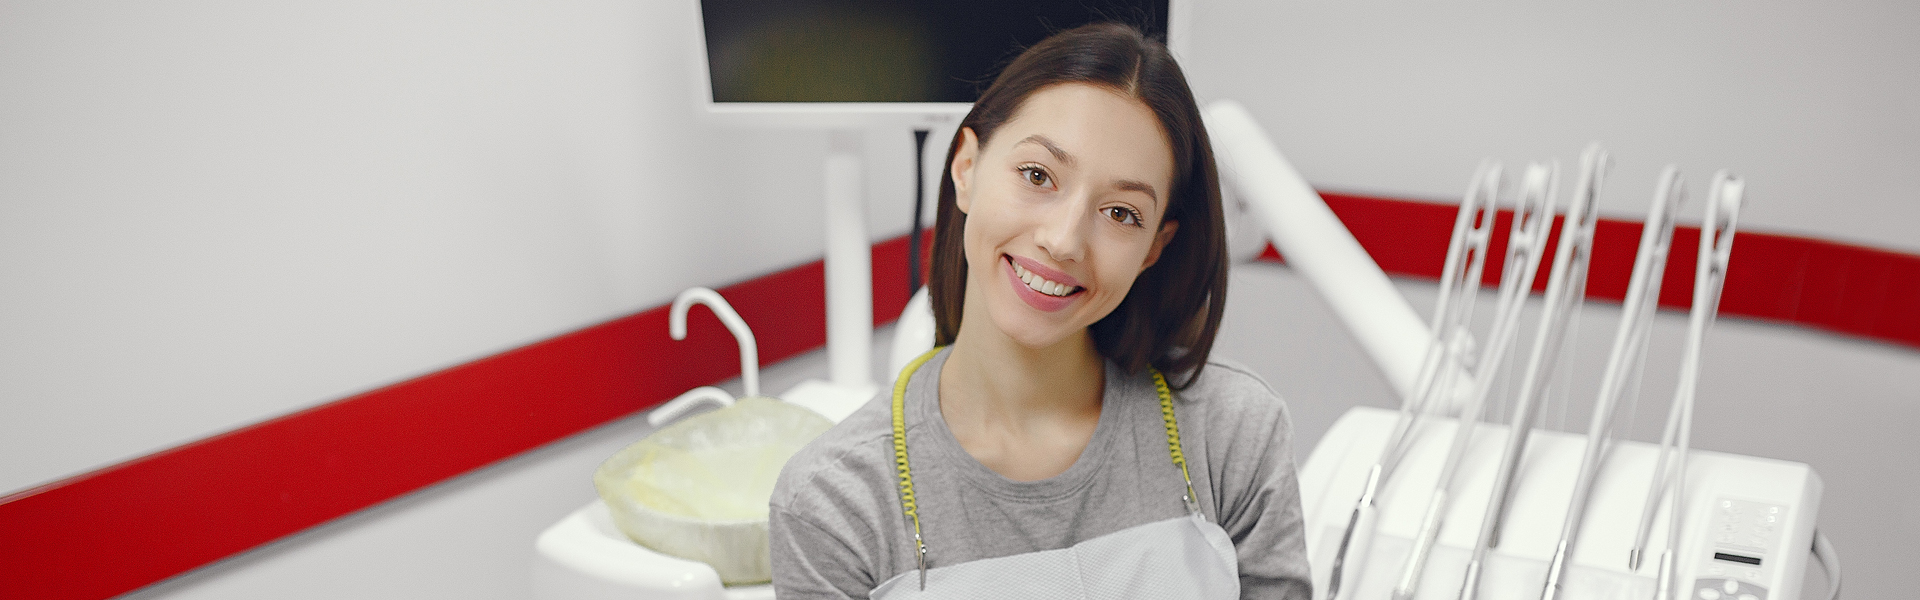 5 Compelling Reasons Why You Should Consider Sedation Dentistry